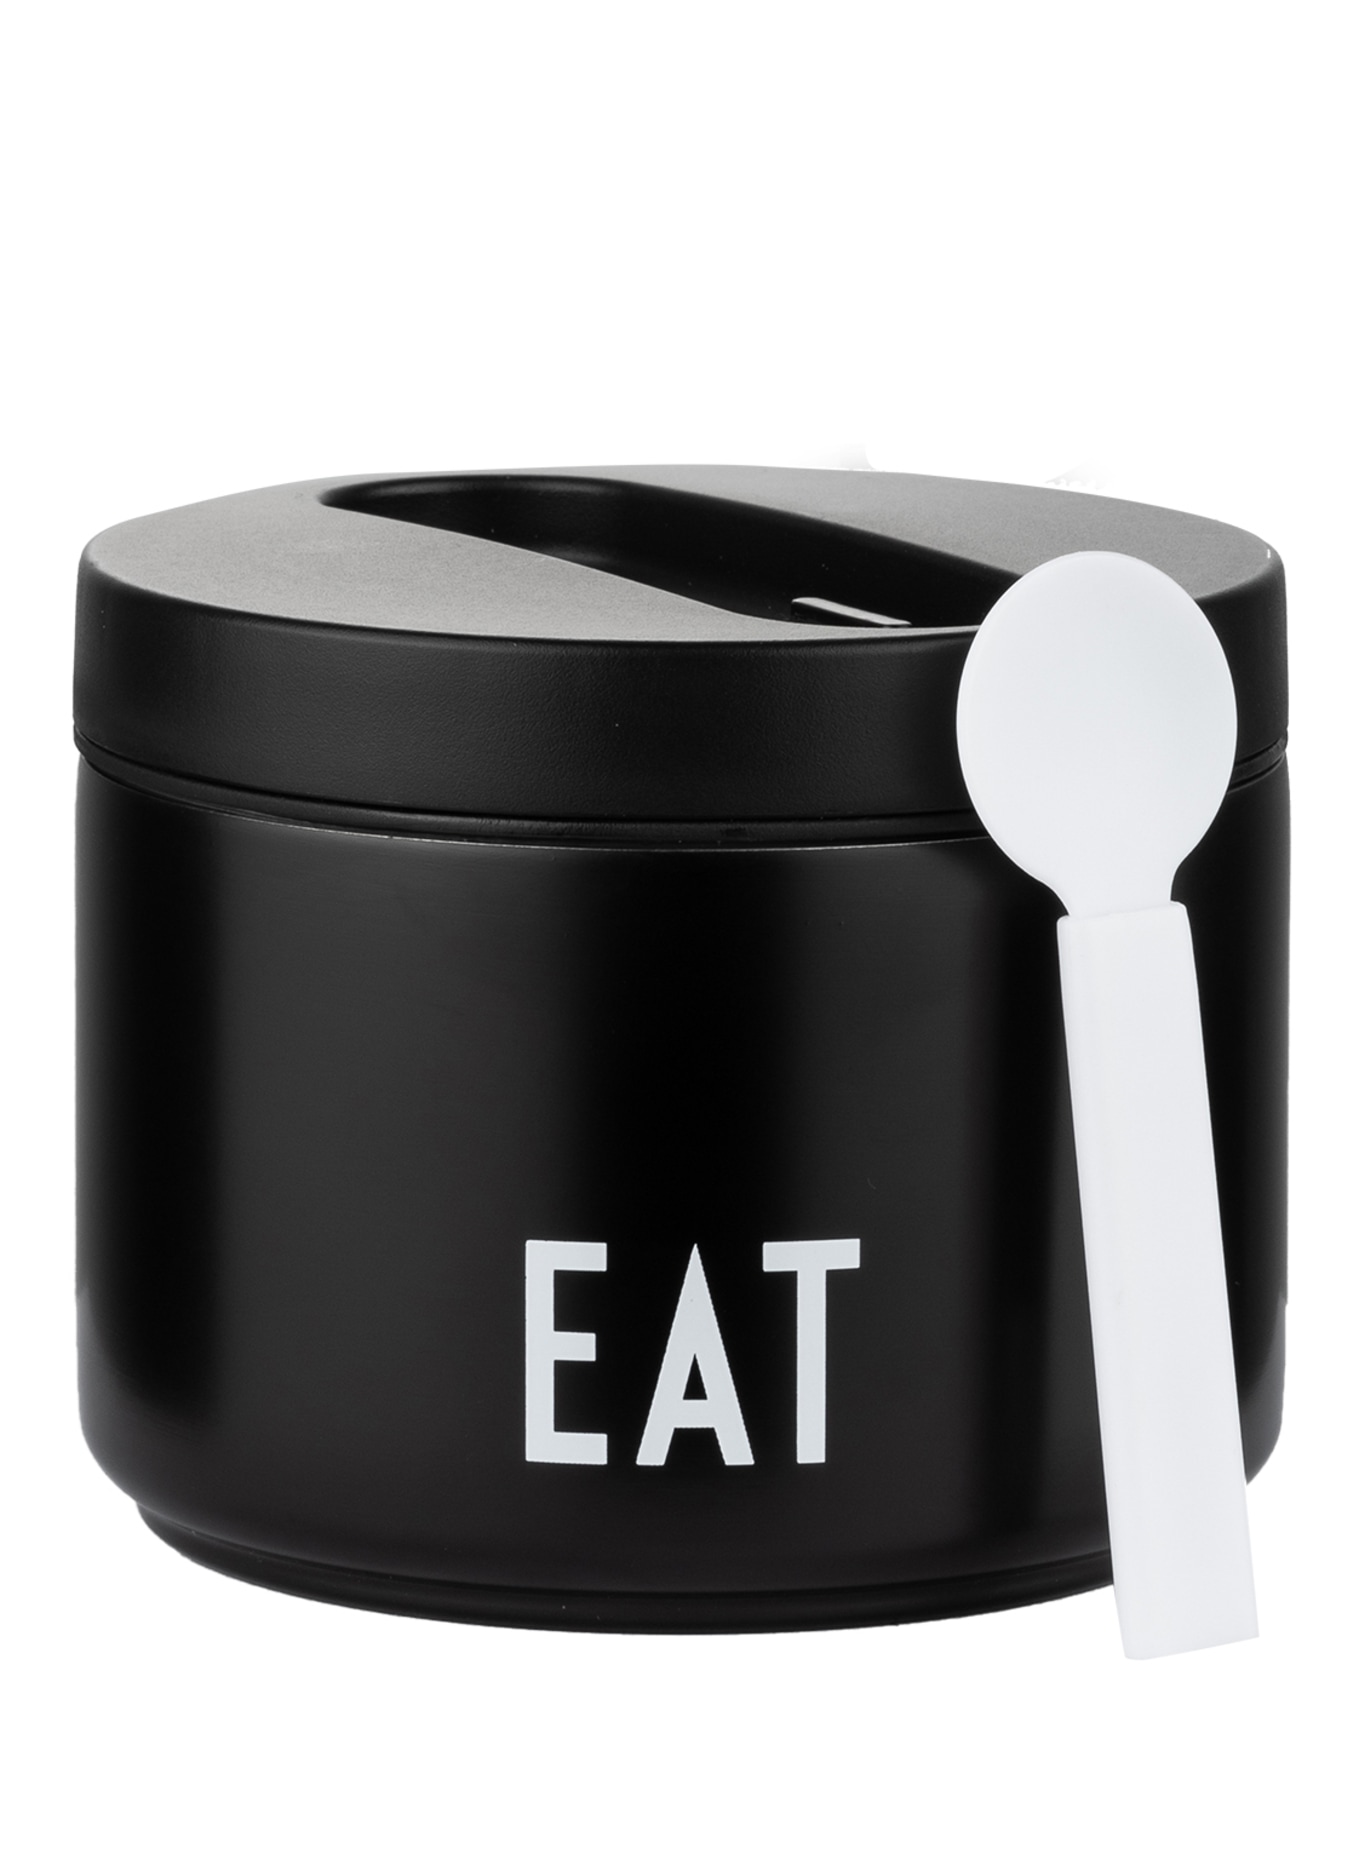 DESIGN LETTERS Thermo-Lunchbox EAT SMALL, Farbe: SCHWARZ/ WEISS (Bild 2)